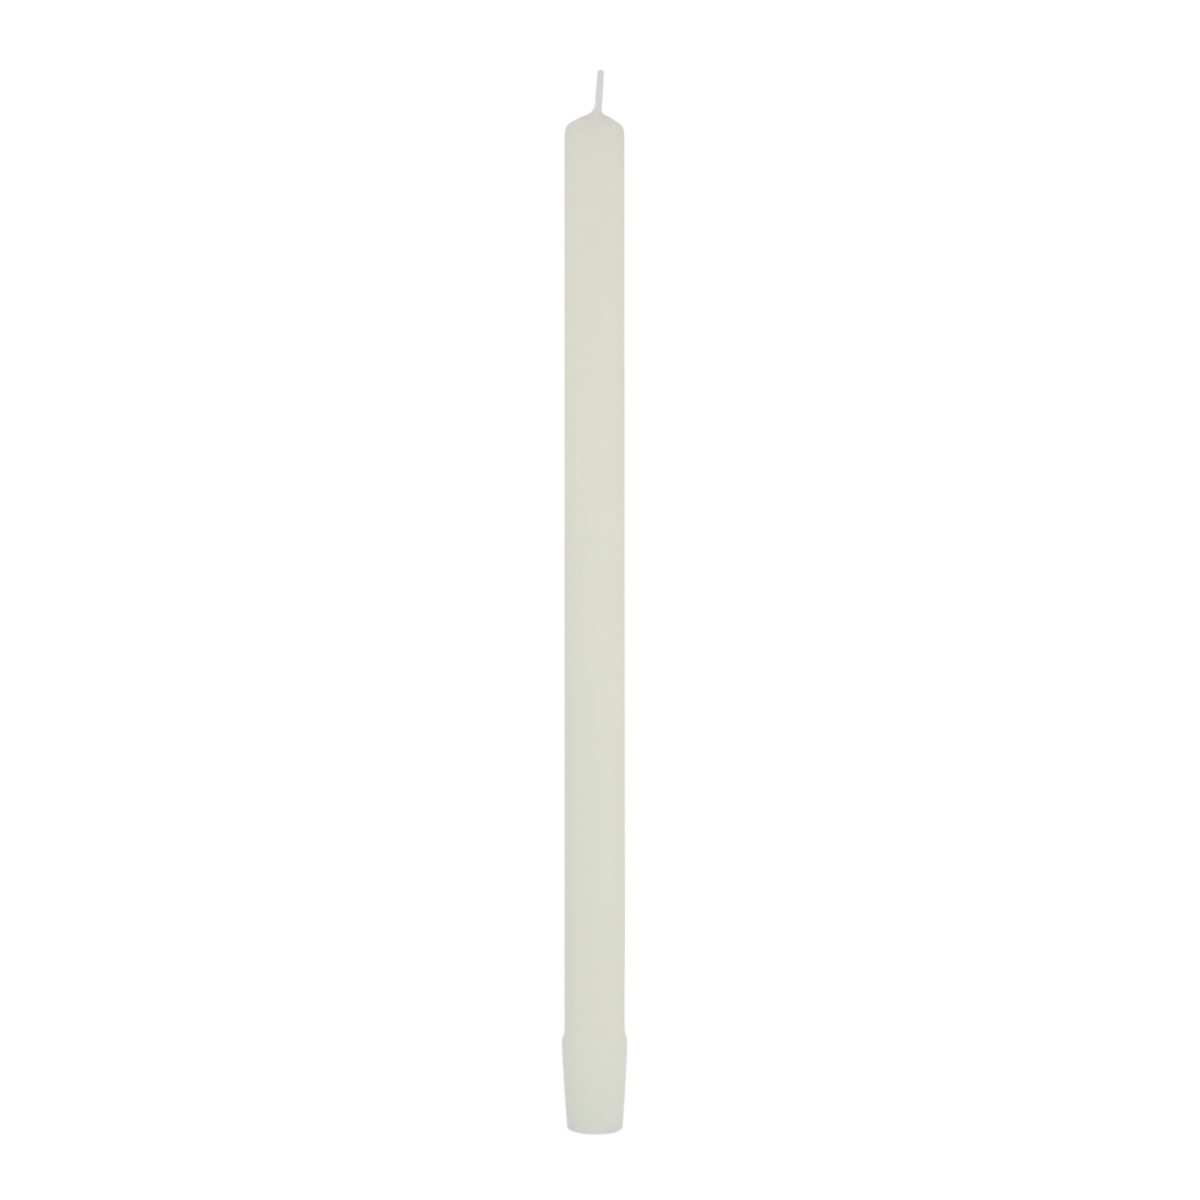 51% BEESWAX 7/8" x 13" SELF FITTING END CANDLE STICK